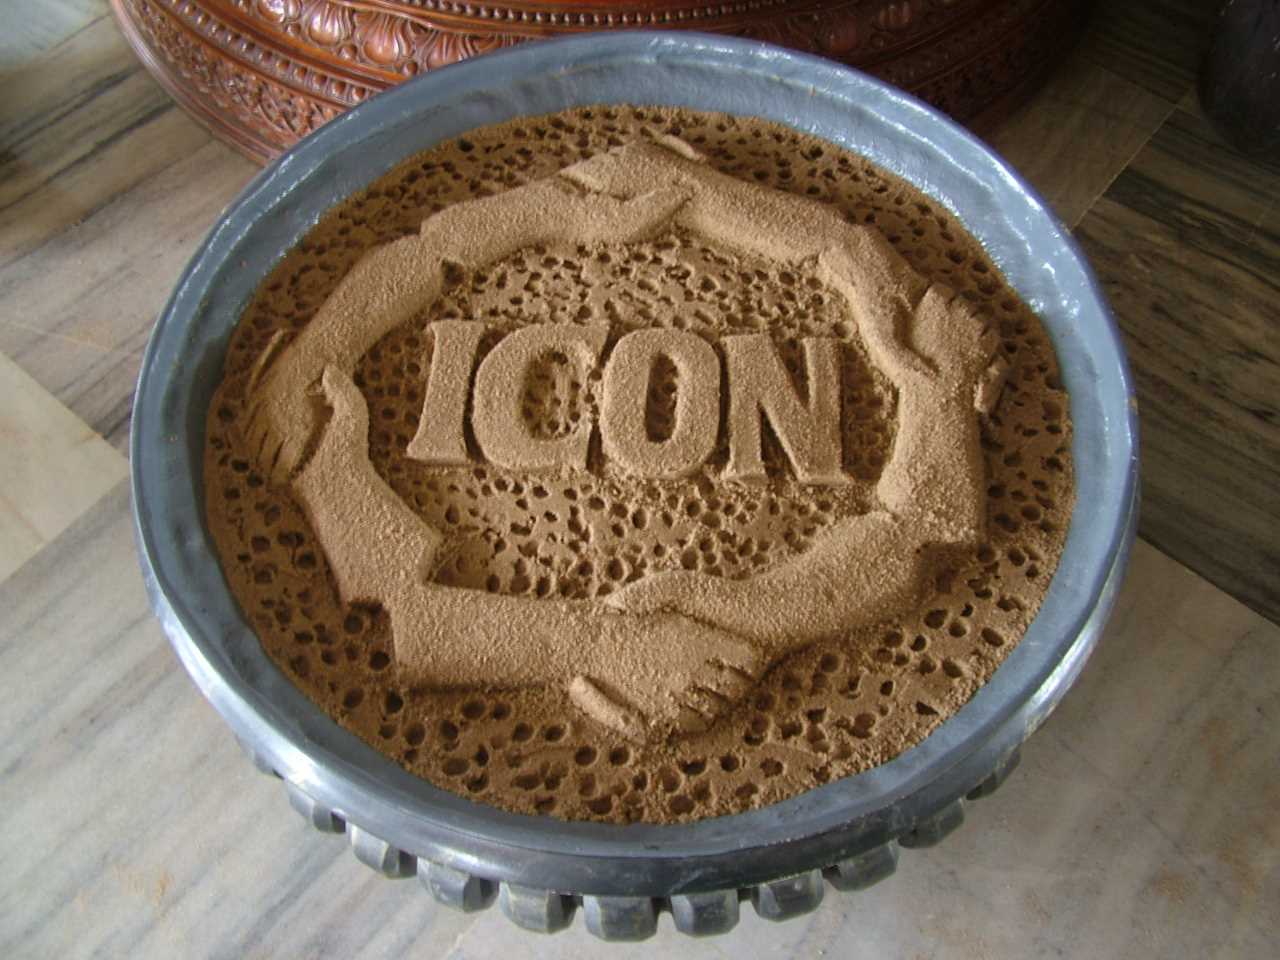 ICON logo in sand